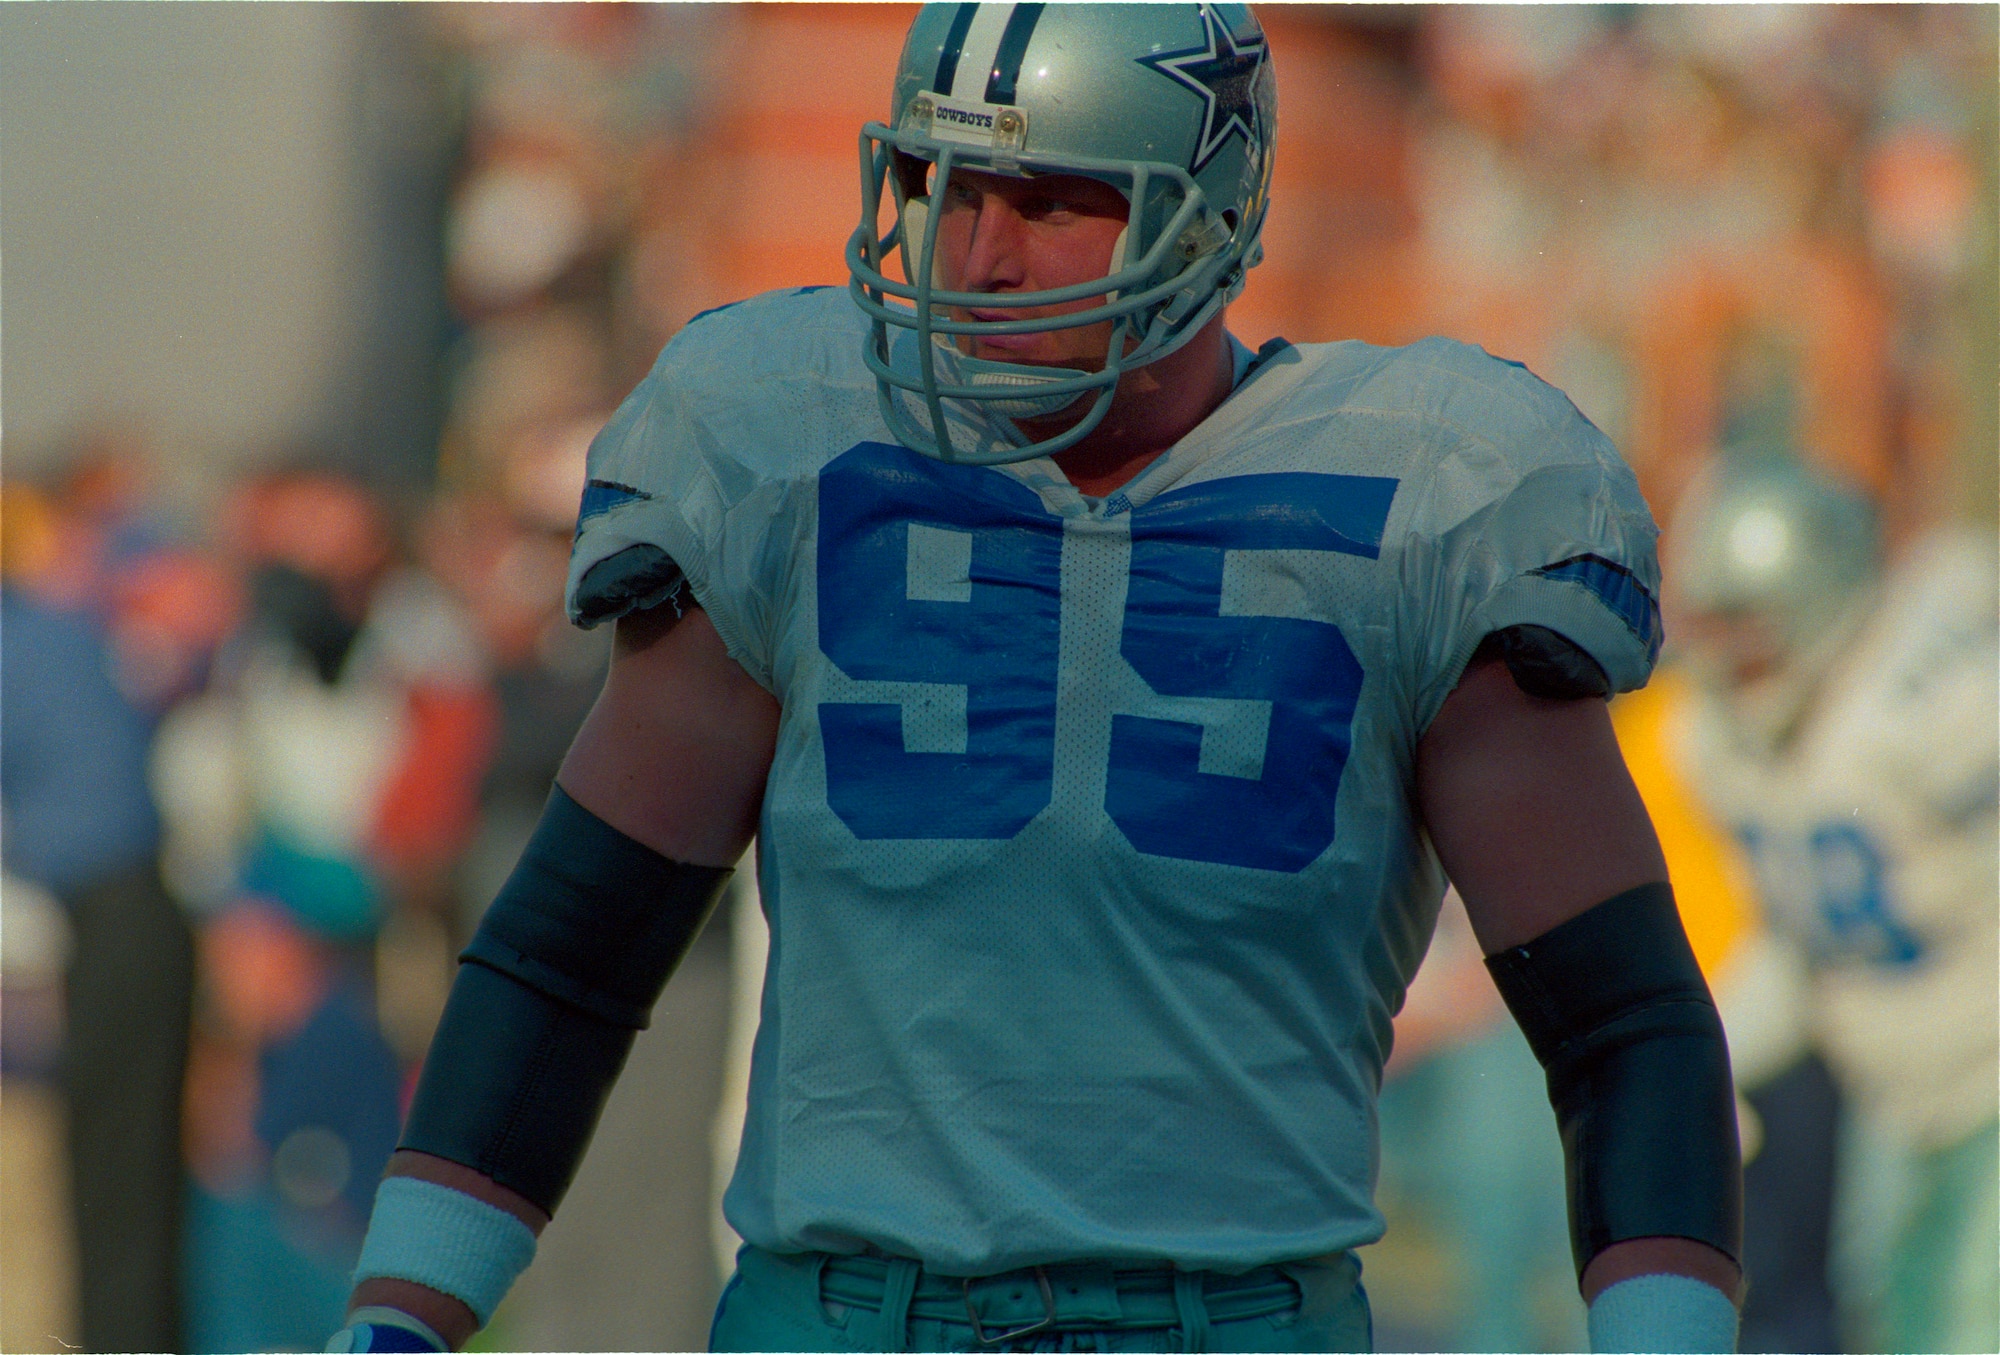 Chad Hennings played for the Dallas Cowboys for nine seasons. During that time, he was part of three Super Bowl winning teams and played in 119 games, recording 27.5 sacks. Before his NFL career, Hennings graduated from the U.S. Air Force Academy in 1988 and went into pilot training. He would eventually fly an A-10 Thunderbolt II in 45 combat sorties over northern Iraq during two deployments in 1991 and early 1992. (Courtesy photo/Dallas Cowboys) 